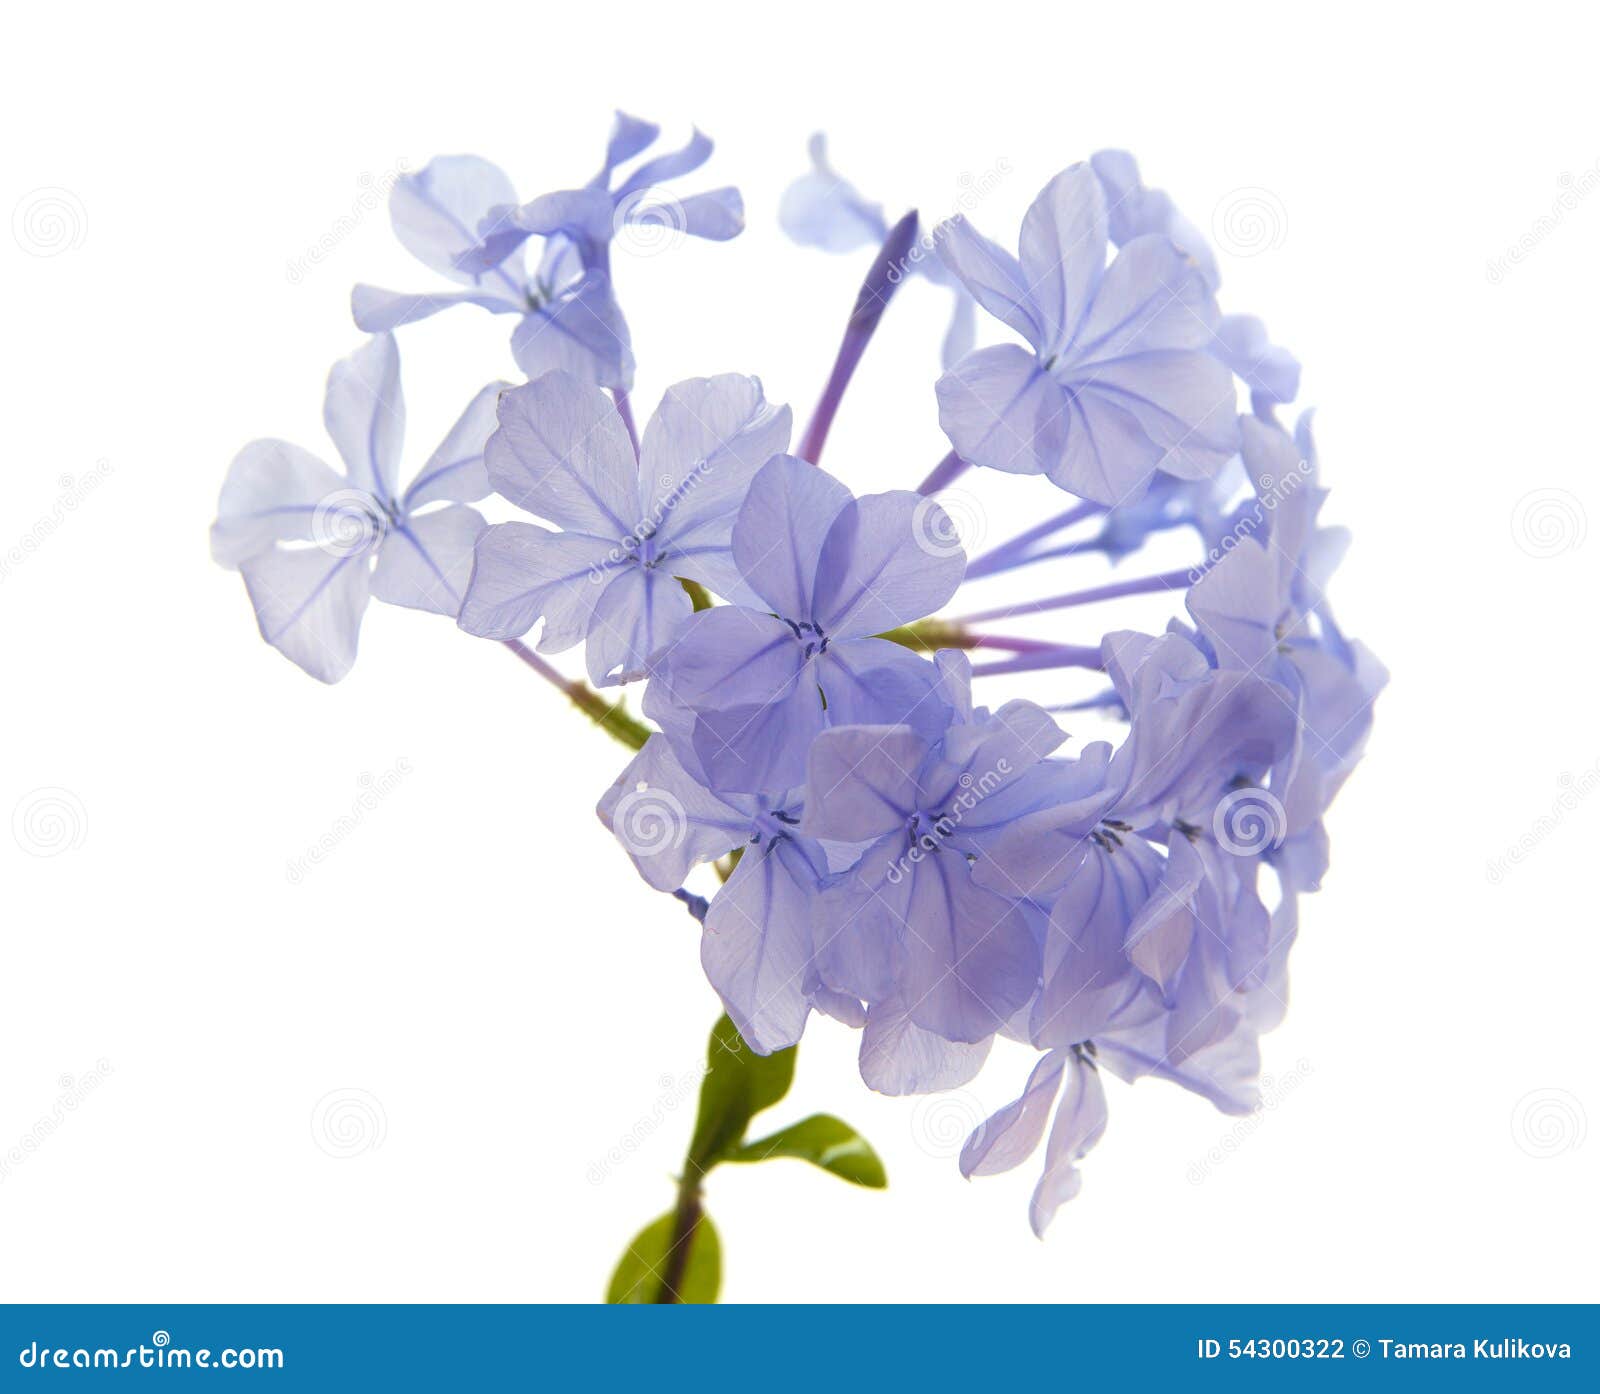 Plumbago auriculata stock photo. Image of pretty, inflorescence - 54300322